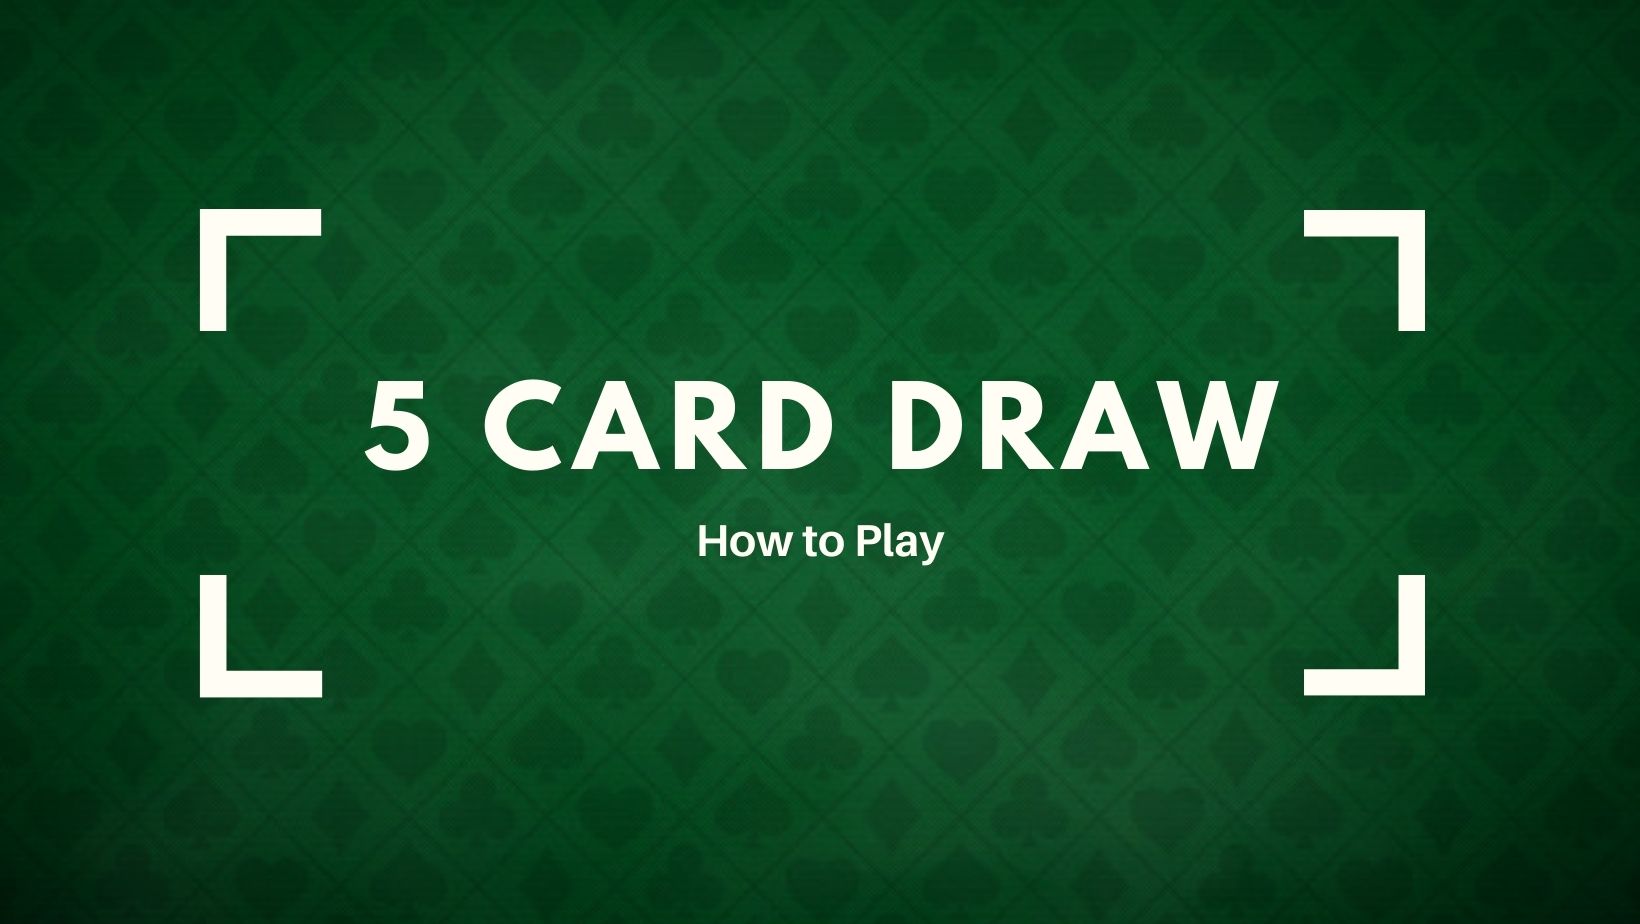 5 Card Draw Official Rules. How to play 5 Card Draw?